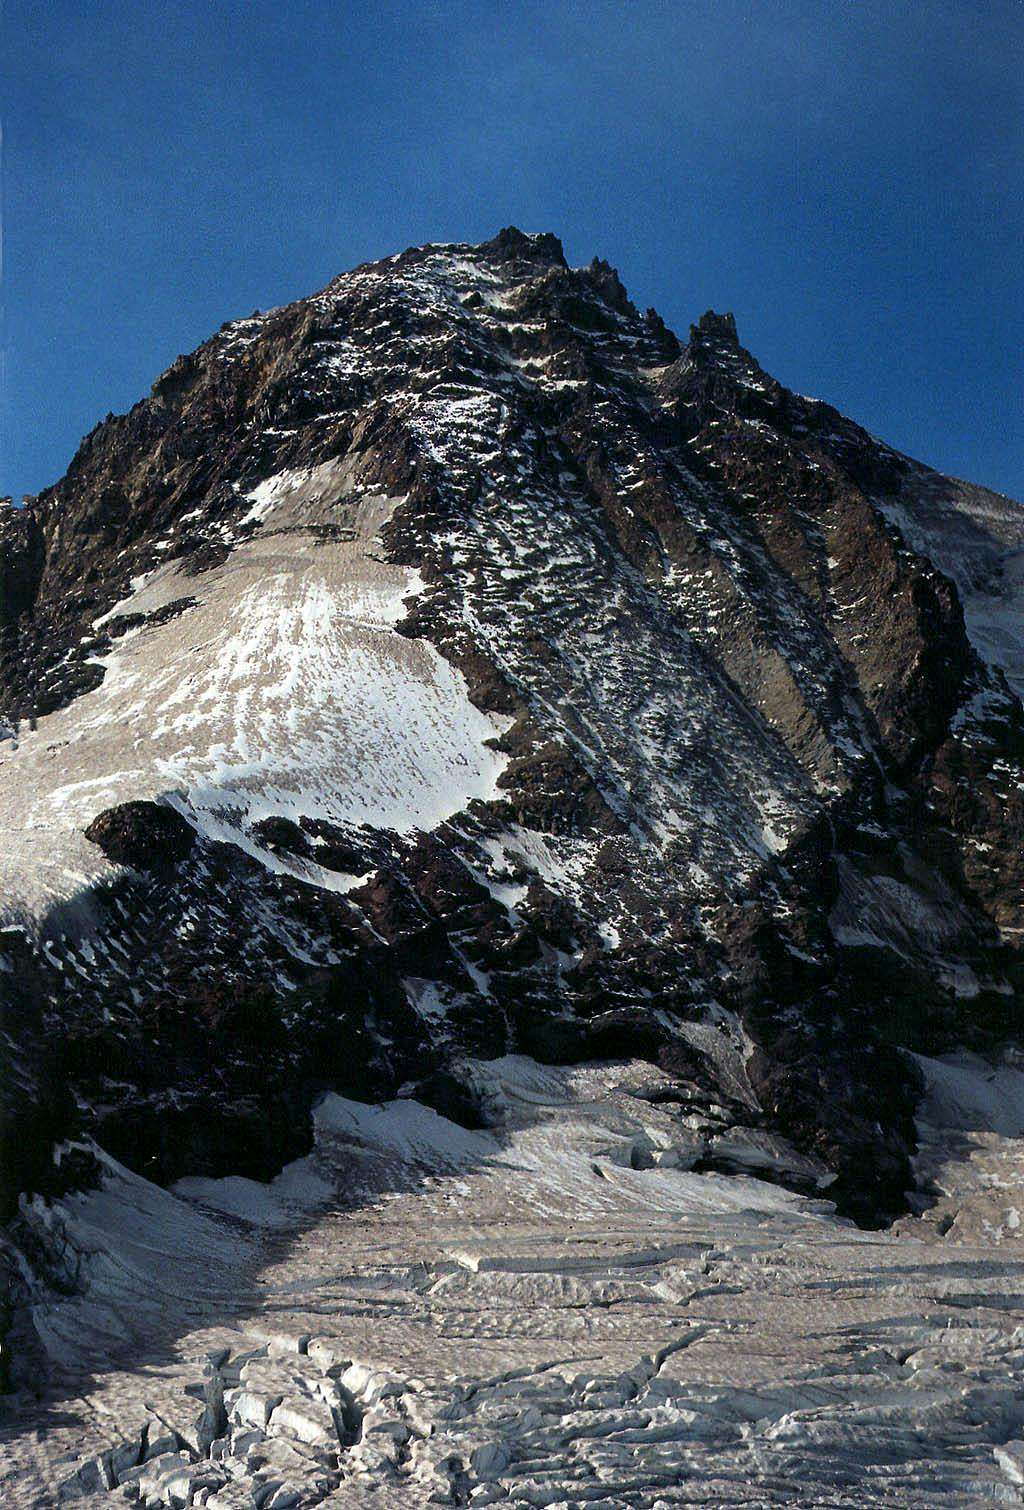 Summit Plug from Cooper Spur, Near Tie In Rock